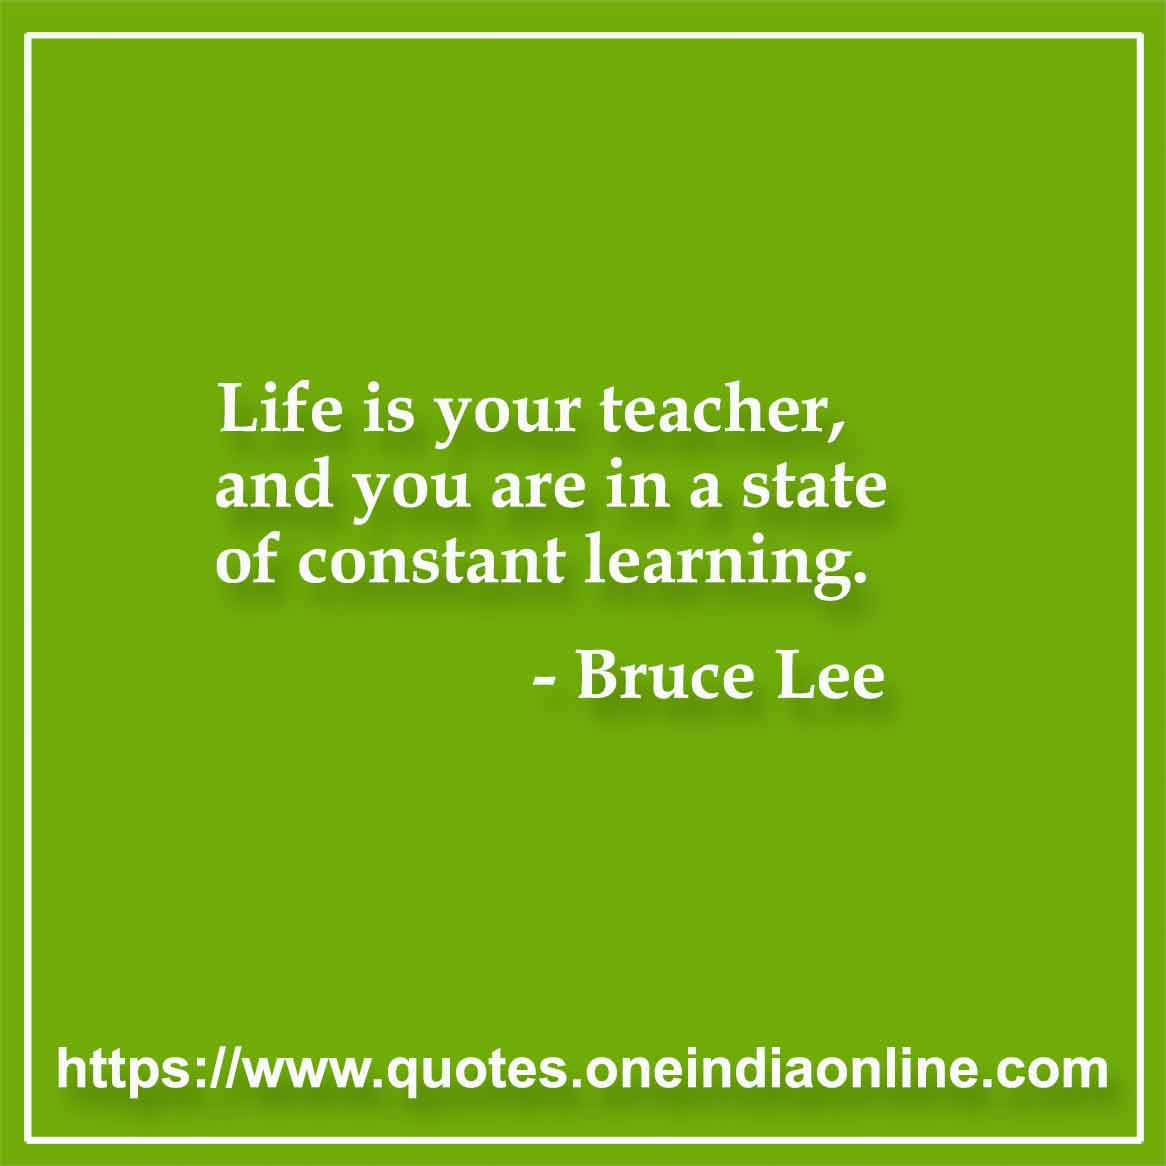 Life is your teacher, and you are in a state of constant learning.

- Sayings by Bruce Lee